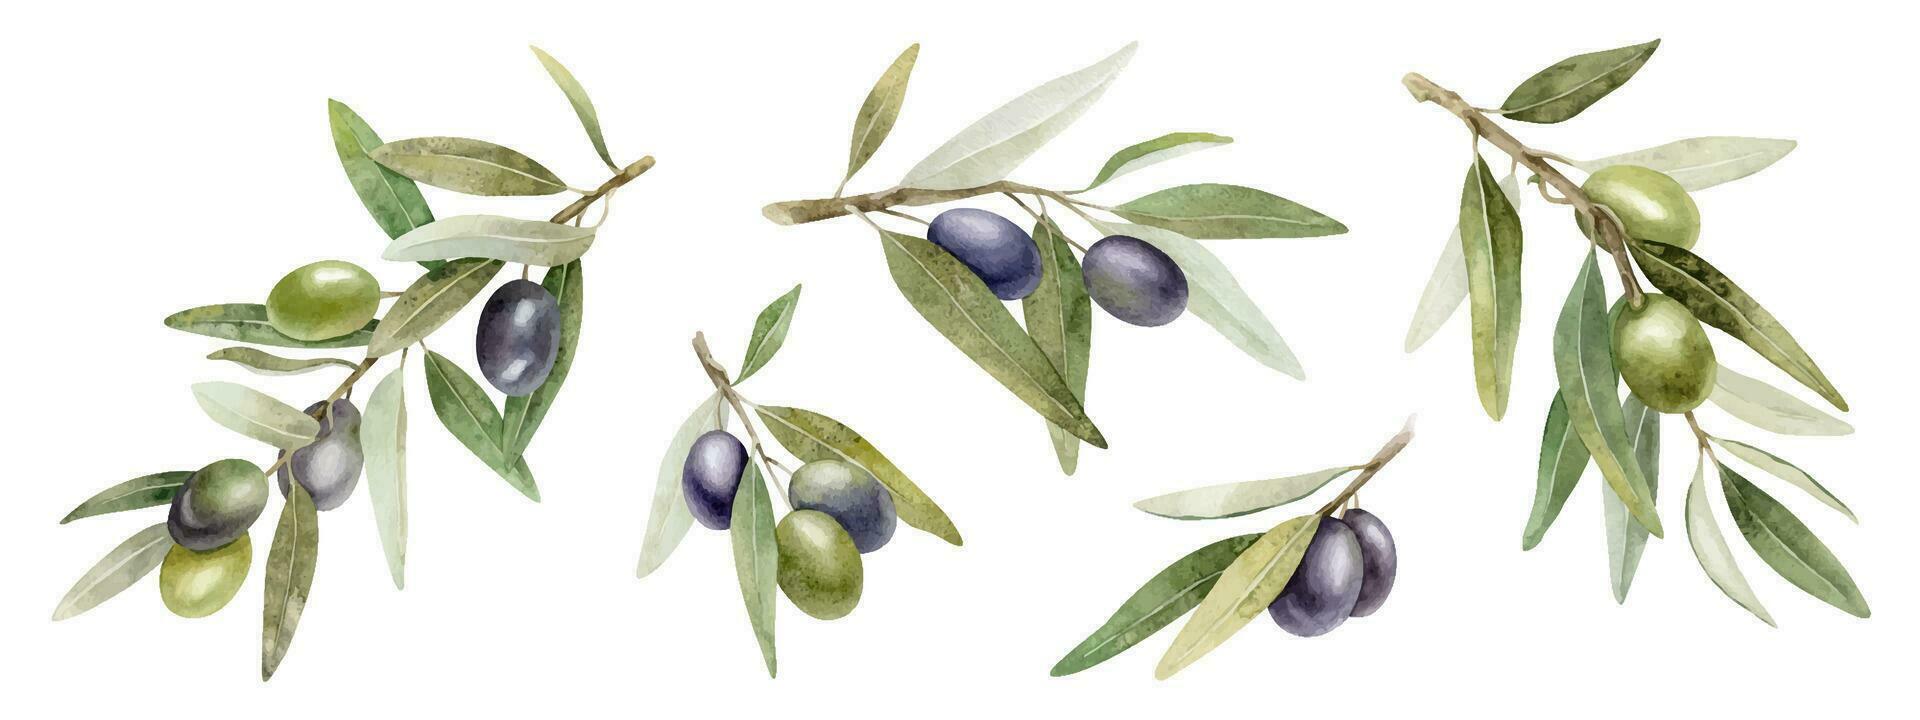 Set of olive branches with leaves and fruits. Watercolor illustrations. Isolated. For packaging design, wedding, stationery, greetings, wallpapers, and invitations vector